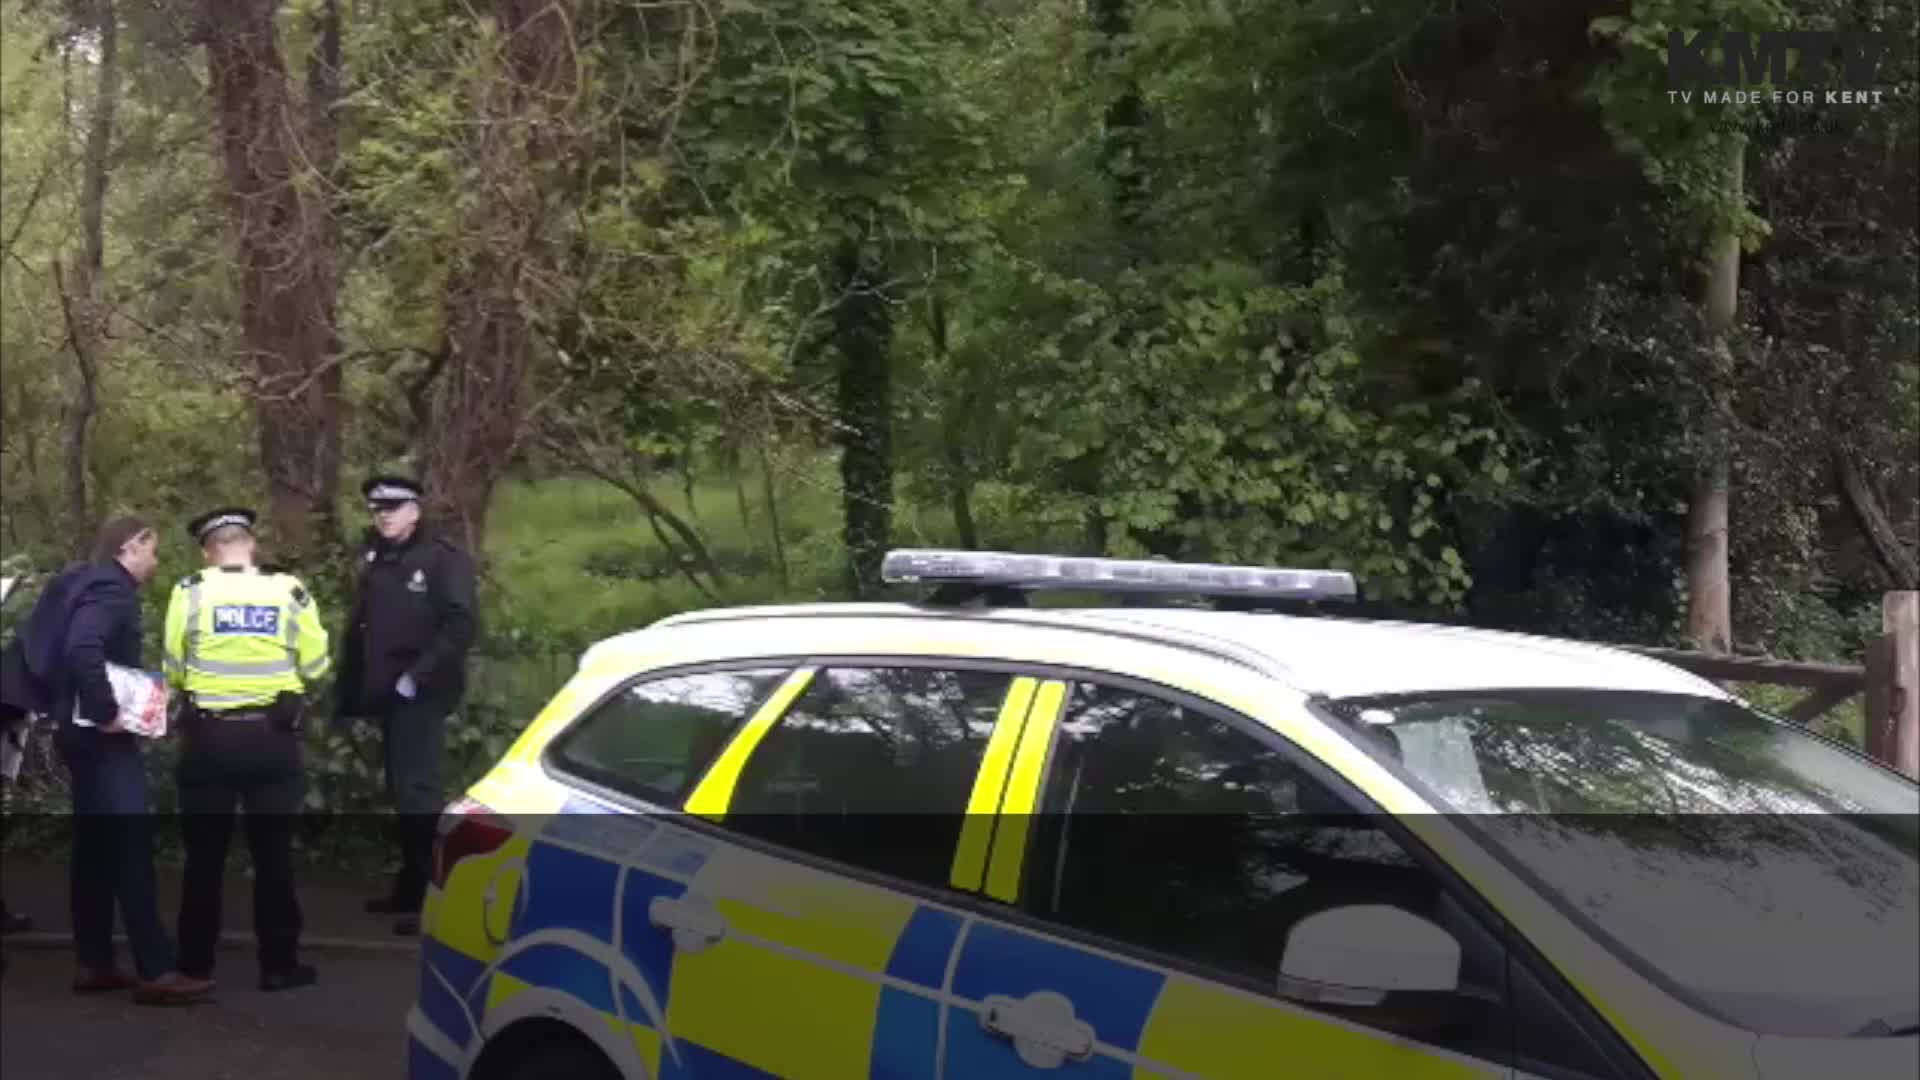 A body was found in woodlands